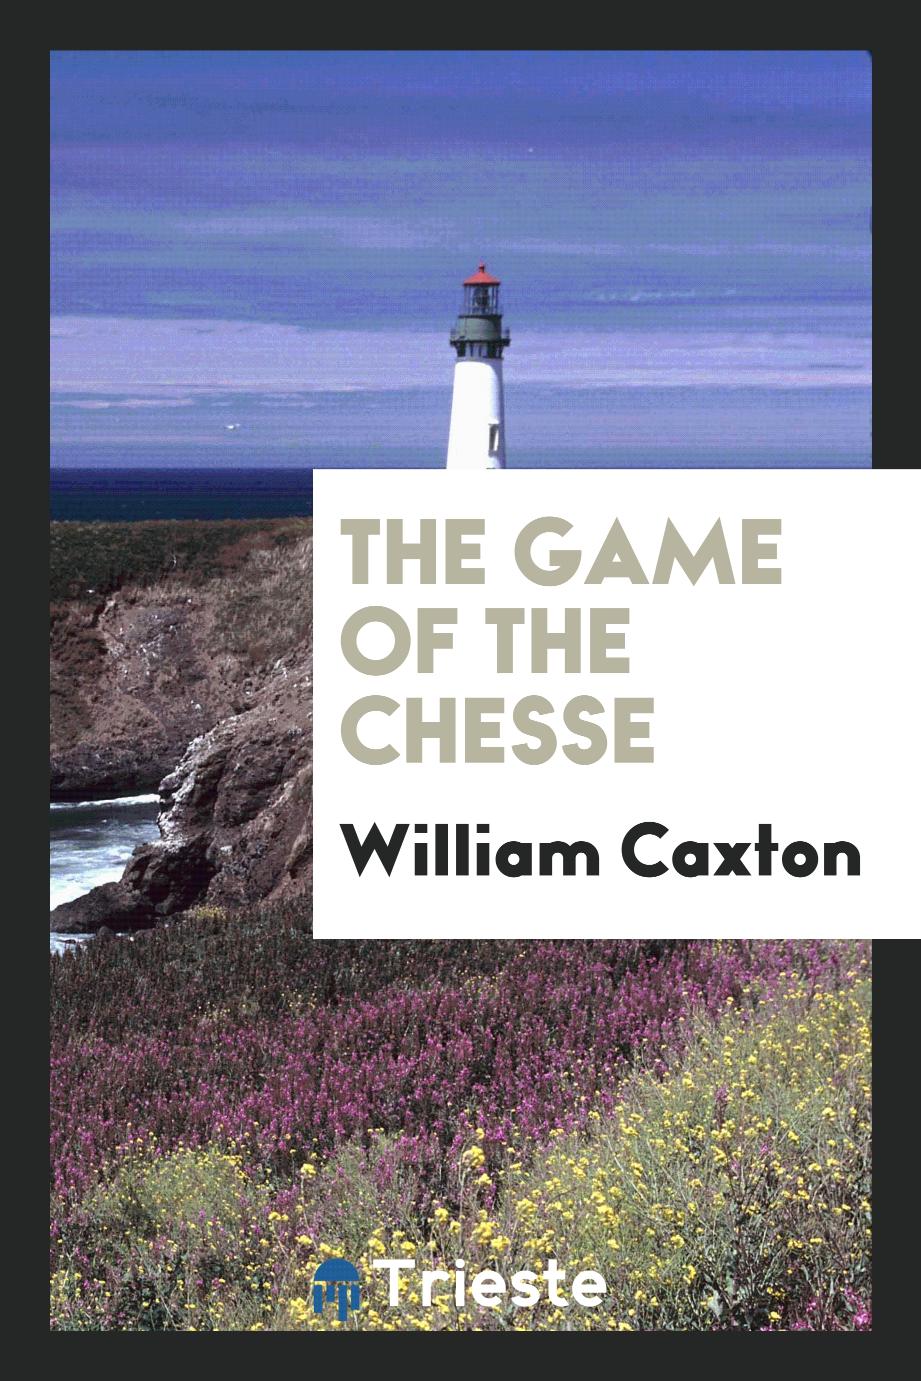 The game of the chesse